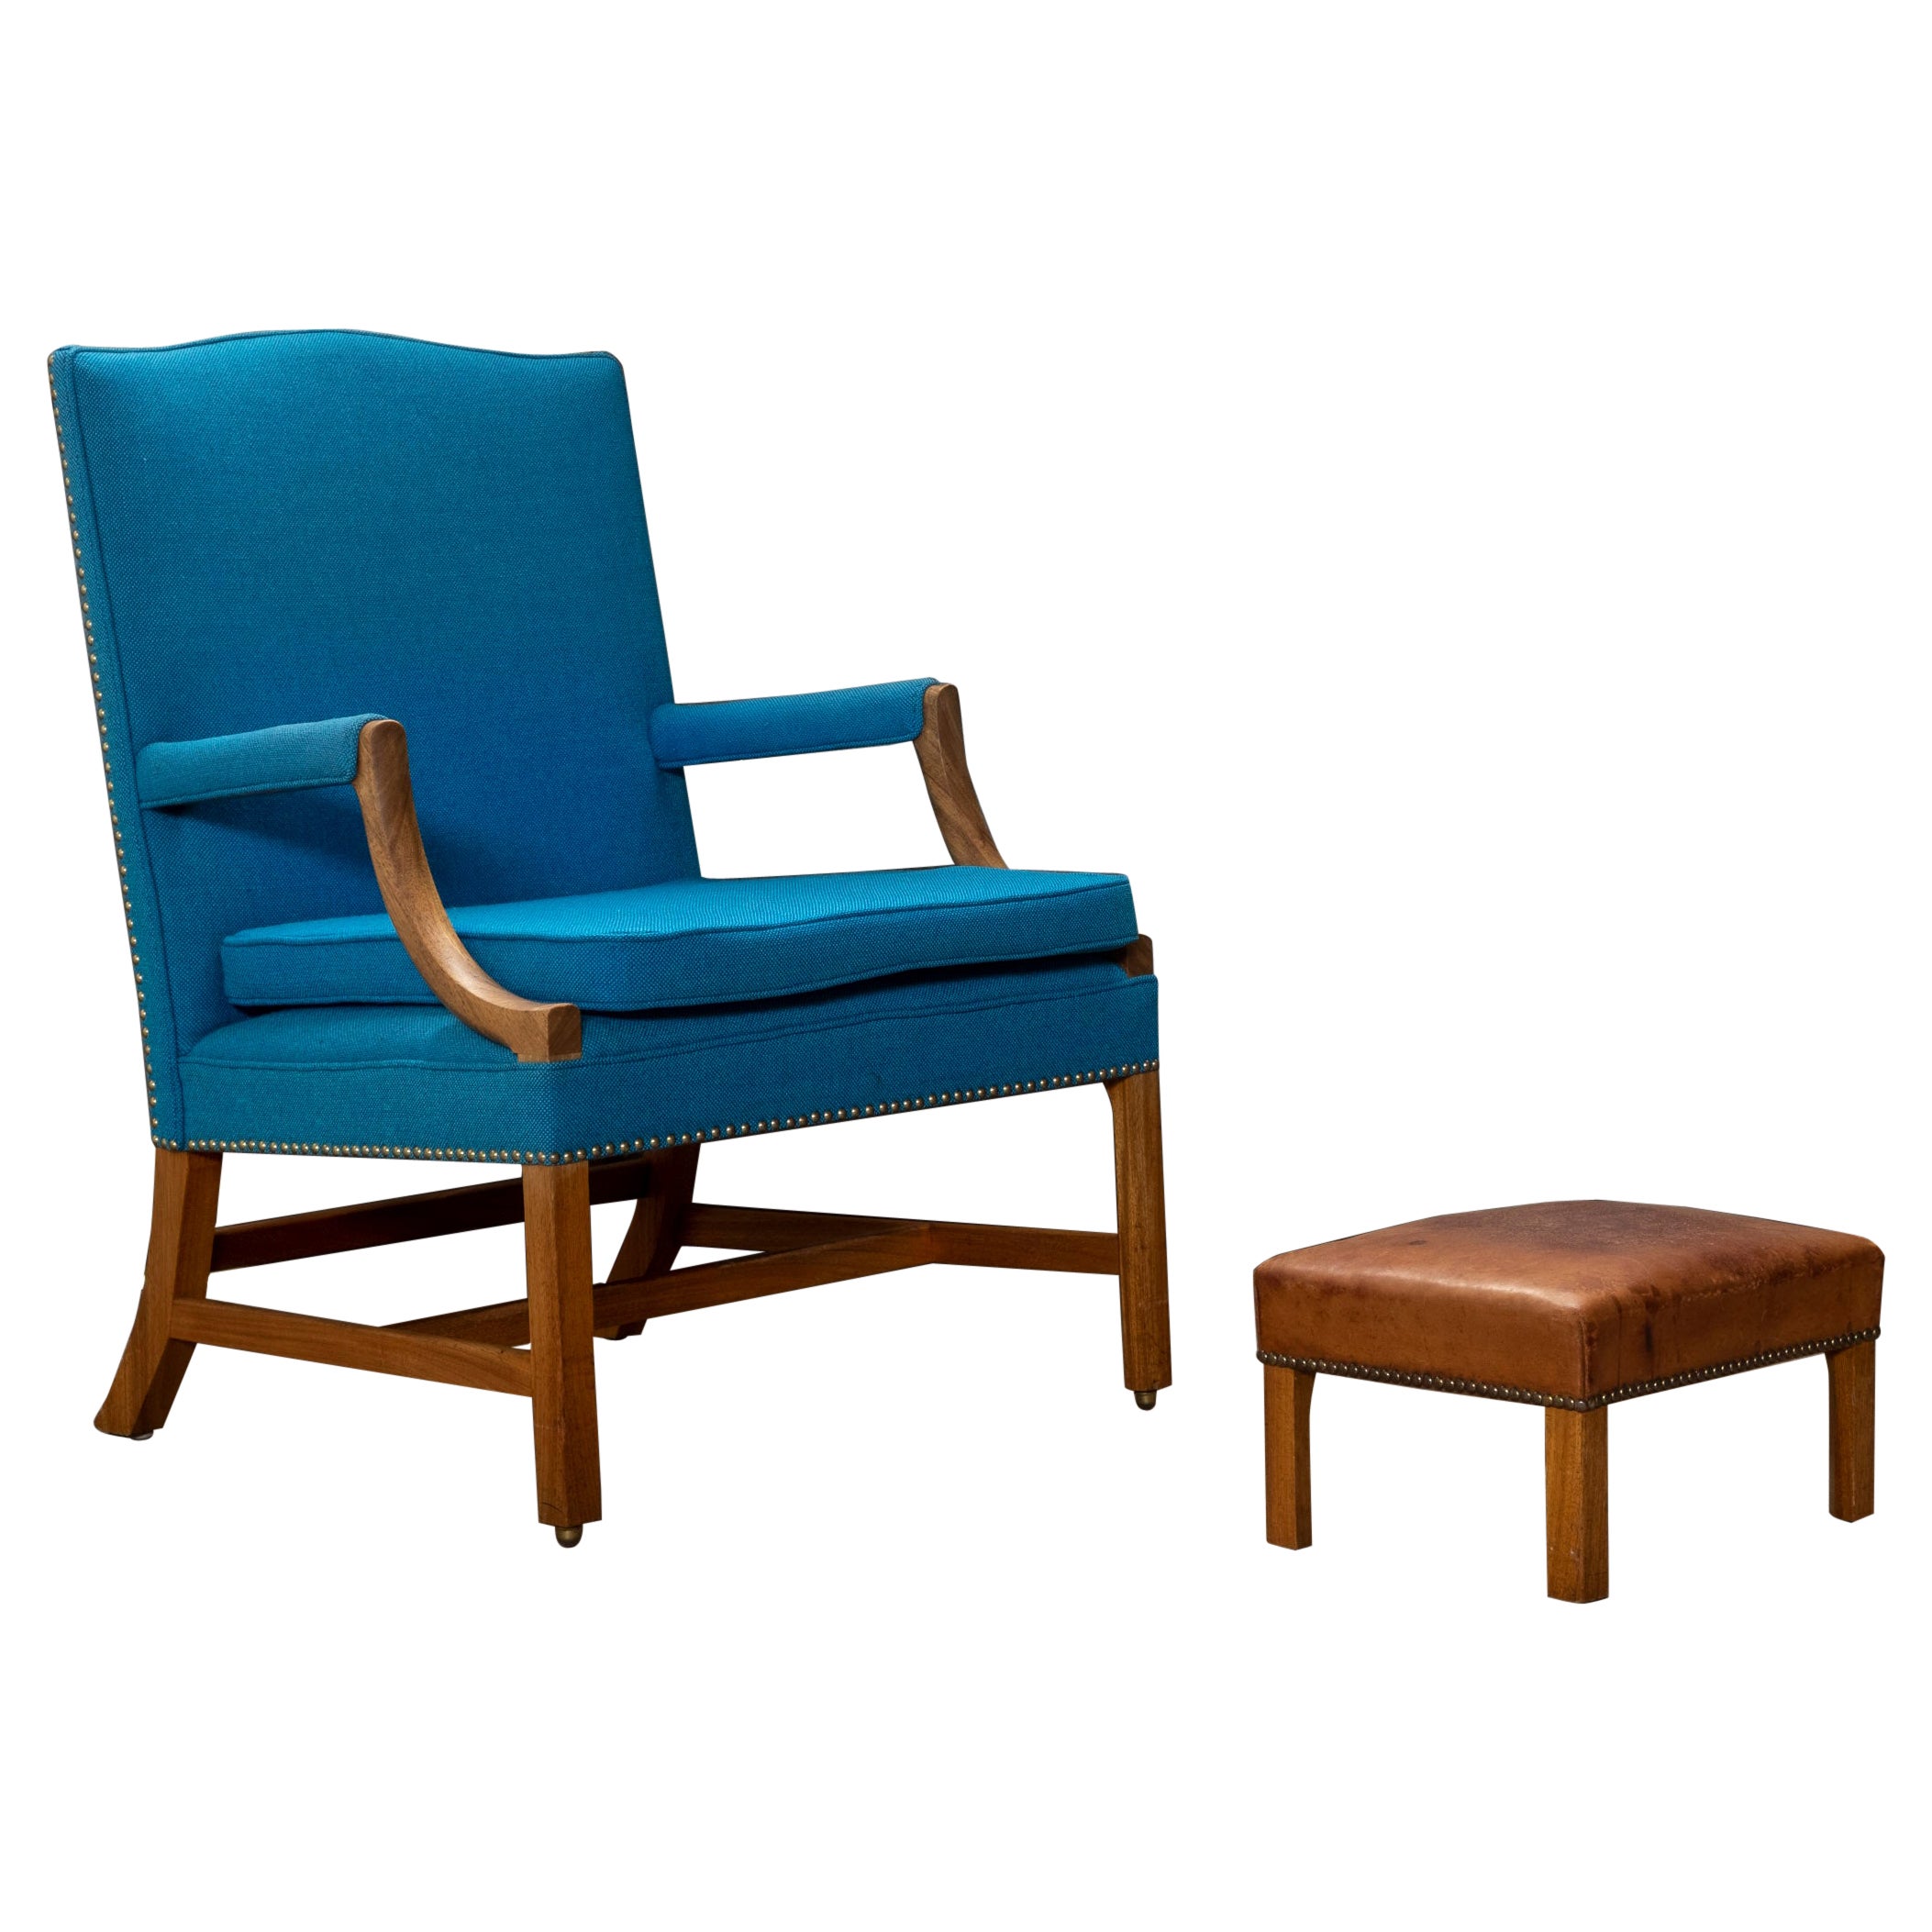 Ole Wanscher Attributed to: Lounge Chair and Ottoman, 1940s, Denmark For Sale